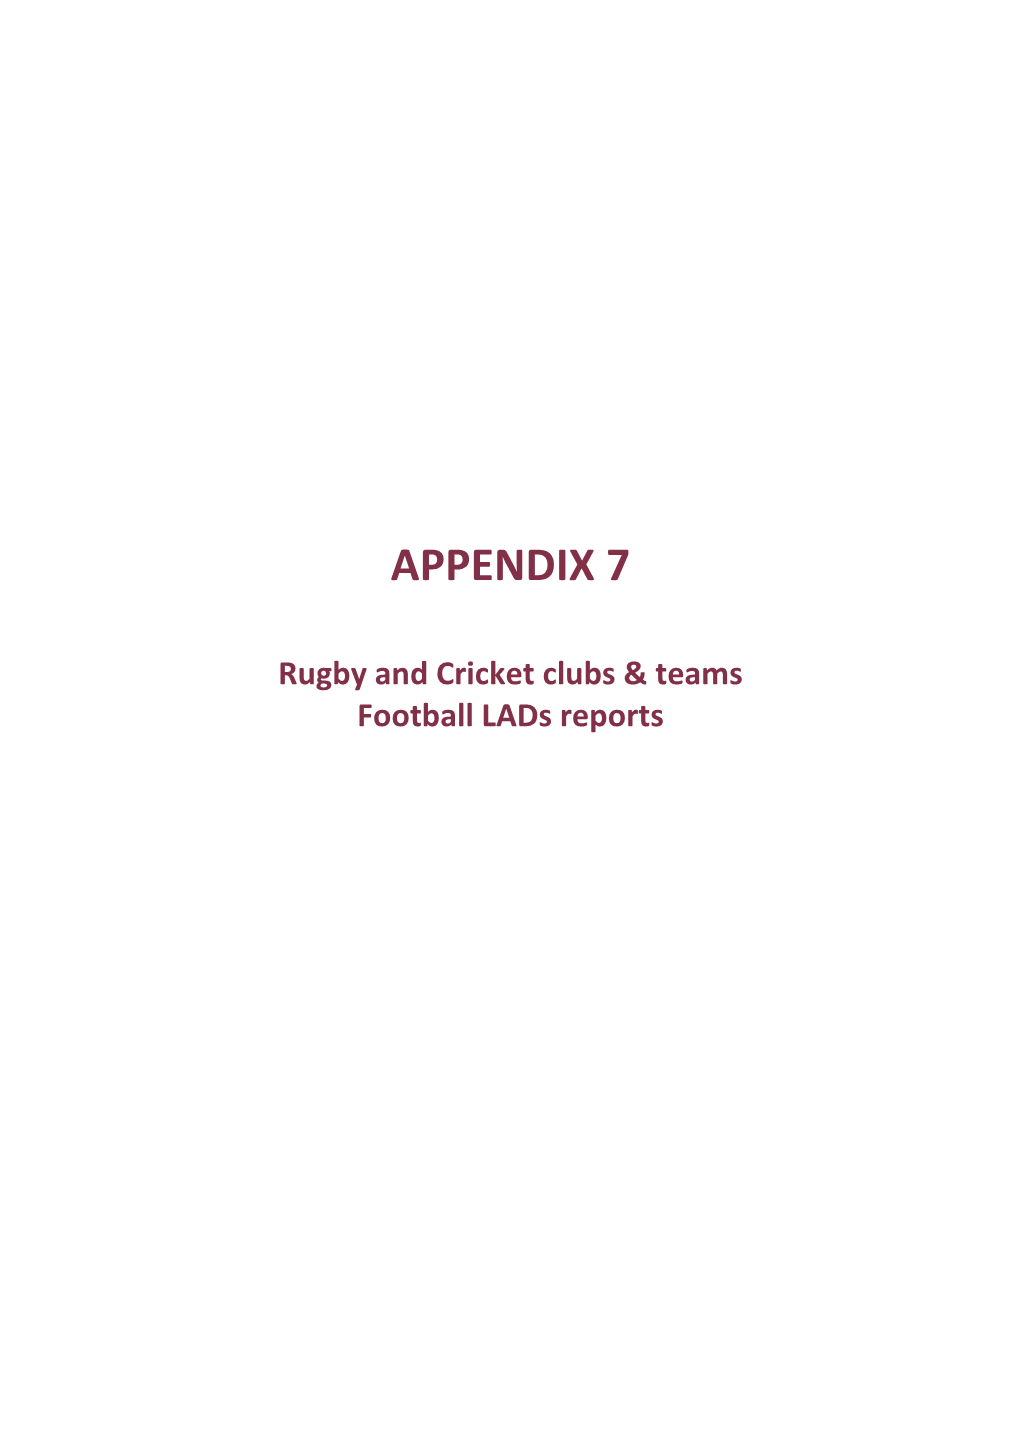 Appendix 7 Rugby and Cricket Clubs and Teams